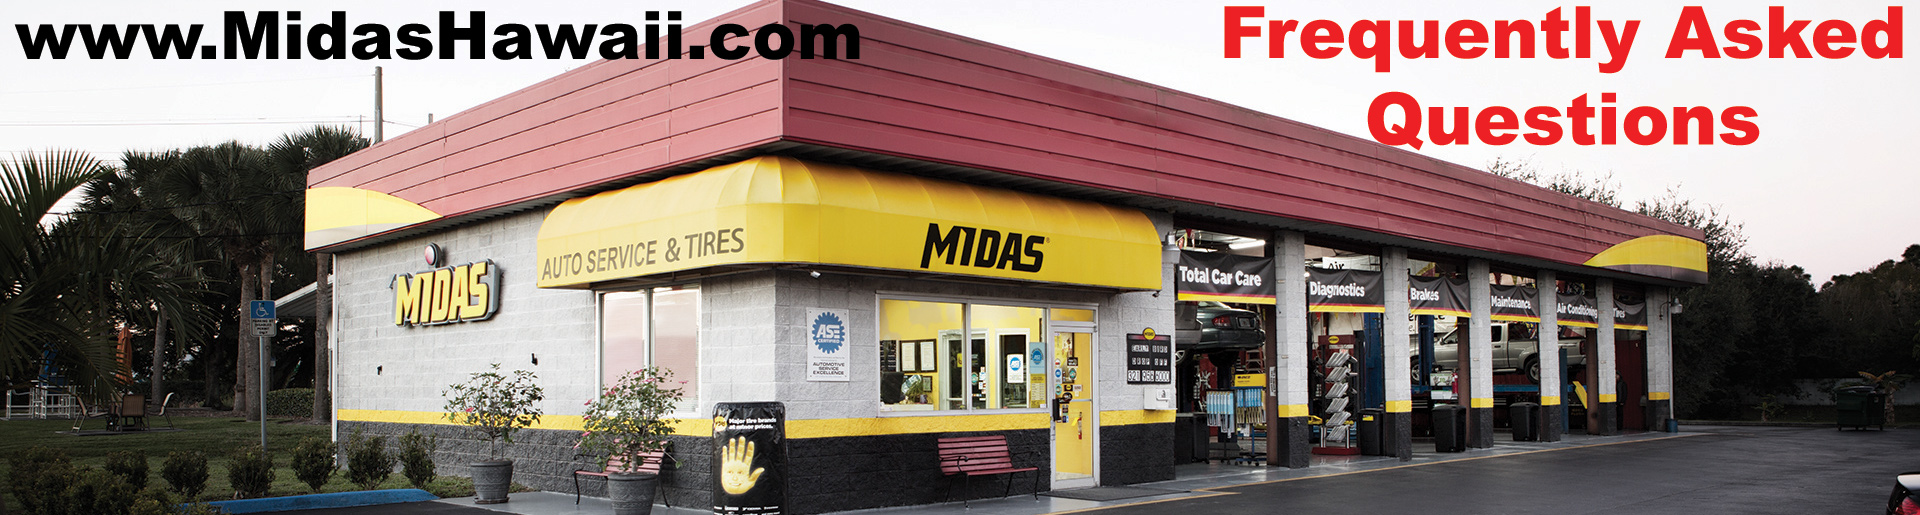 Frequently Asked Questions - Auto Repair & Service - Midas Hawaii